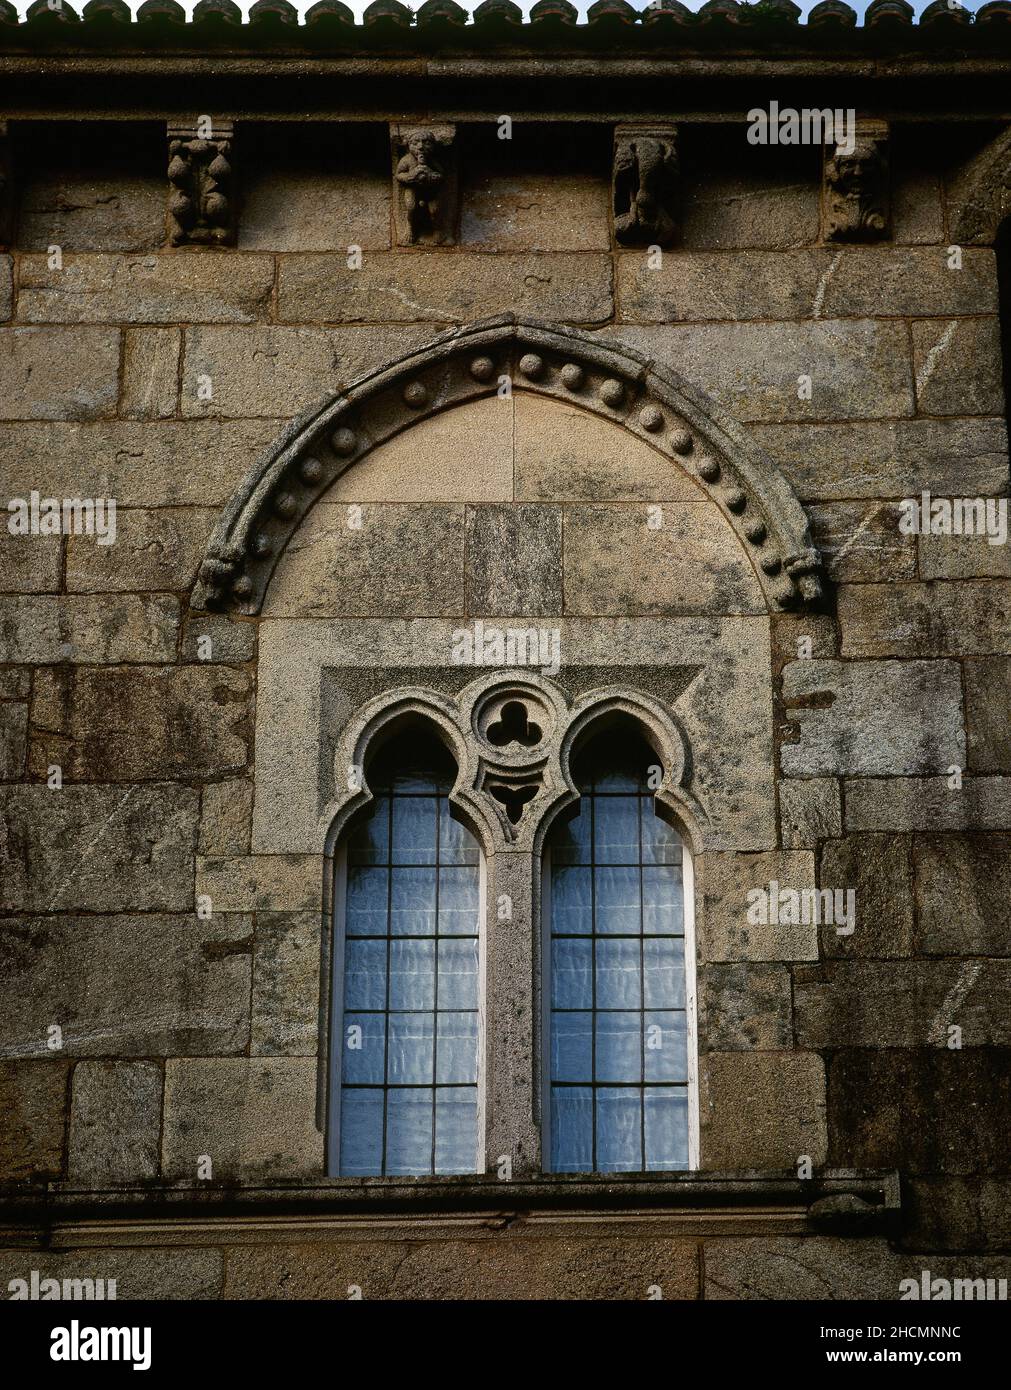 Spain, Galicia, A Coruña Province, Santiago de Compostela. 'Gothic House' or Casa do Rei Don Pedro. Detail of one of the windows on the main facade of the building, of ogival shape and decorative pointed arch. An example of Compostela's 14th-century civil architecture. Popular tradition associates this building with King Peter I of Castile (1350-1369), although it is believed that it may have been the house of Fernando de Castro. Currently it houses the Museum of Pilgrimages and Santiago, created in 1951. Stock Photo